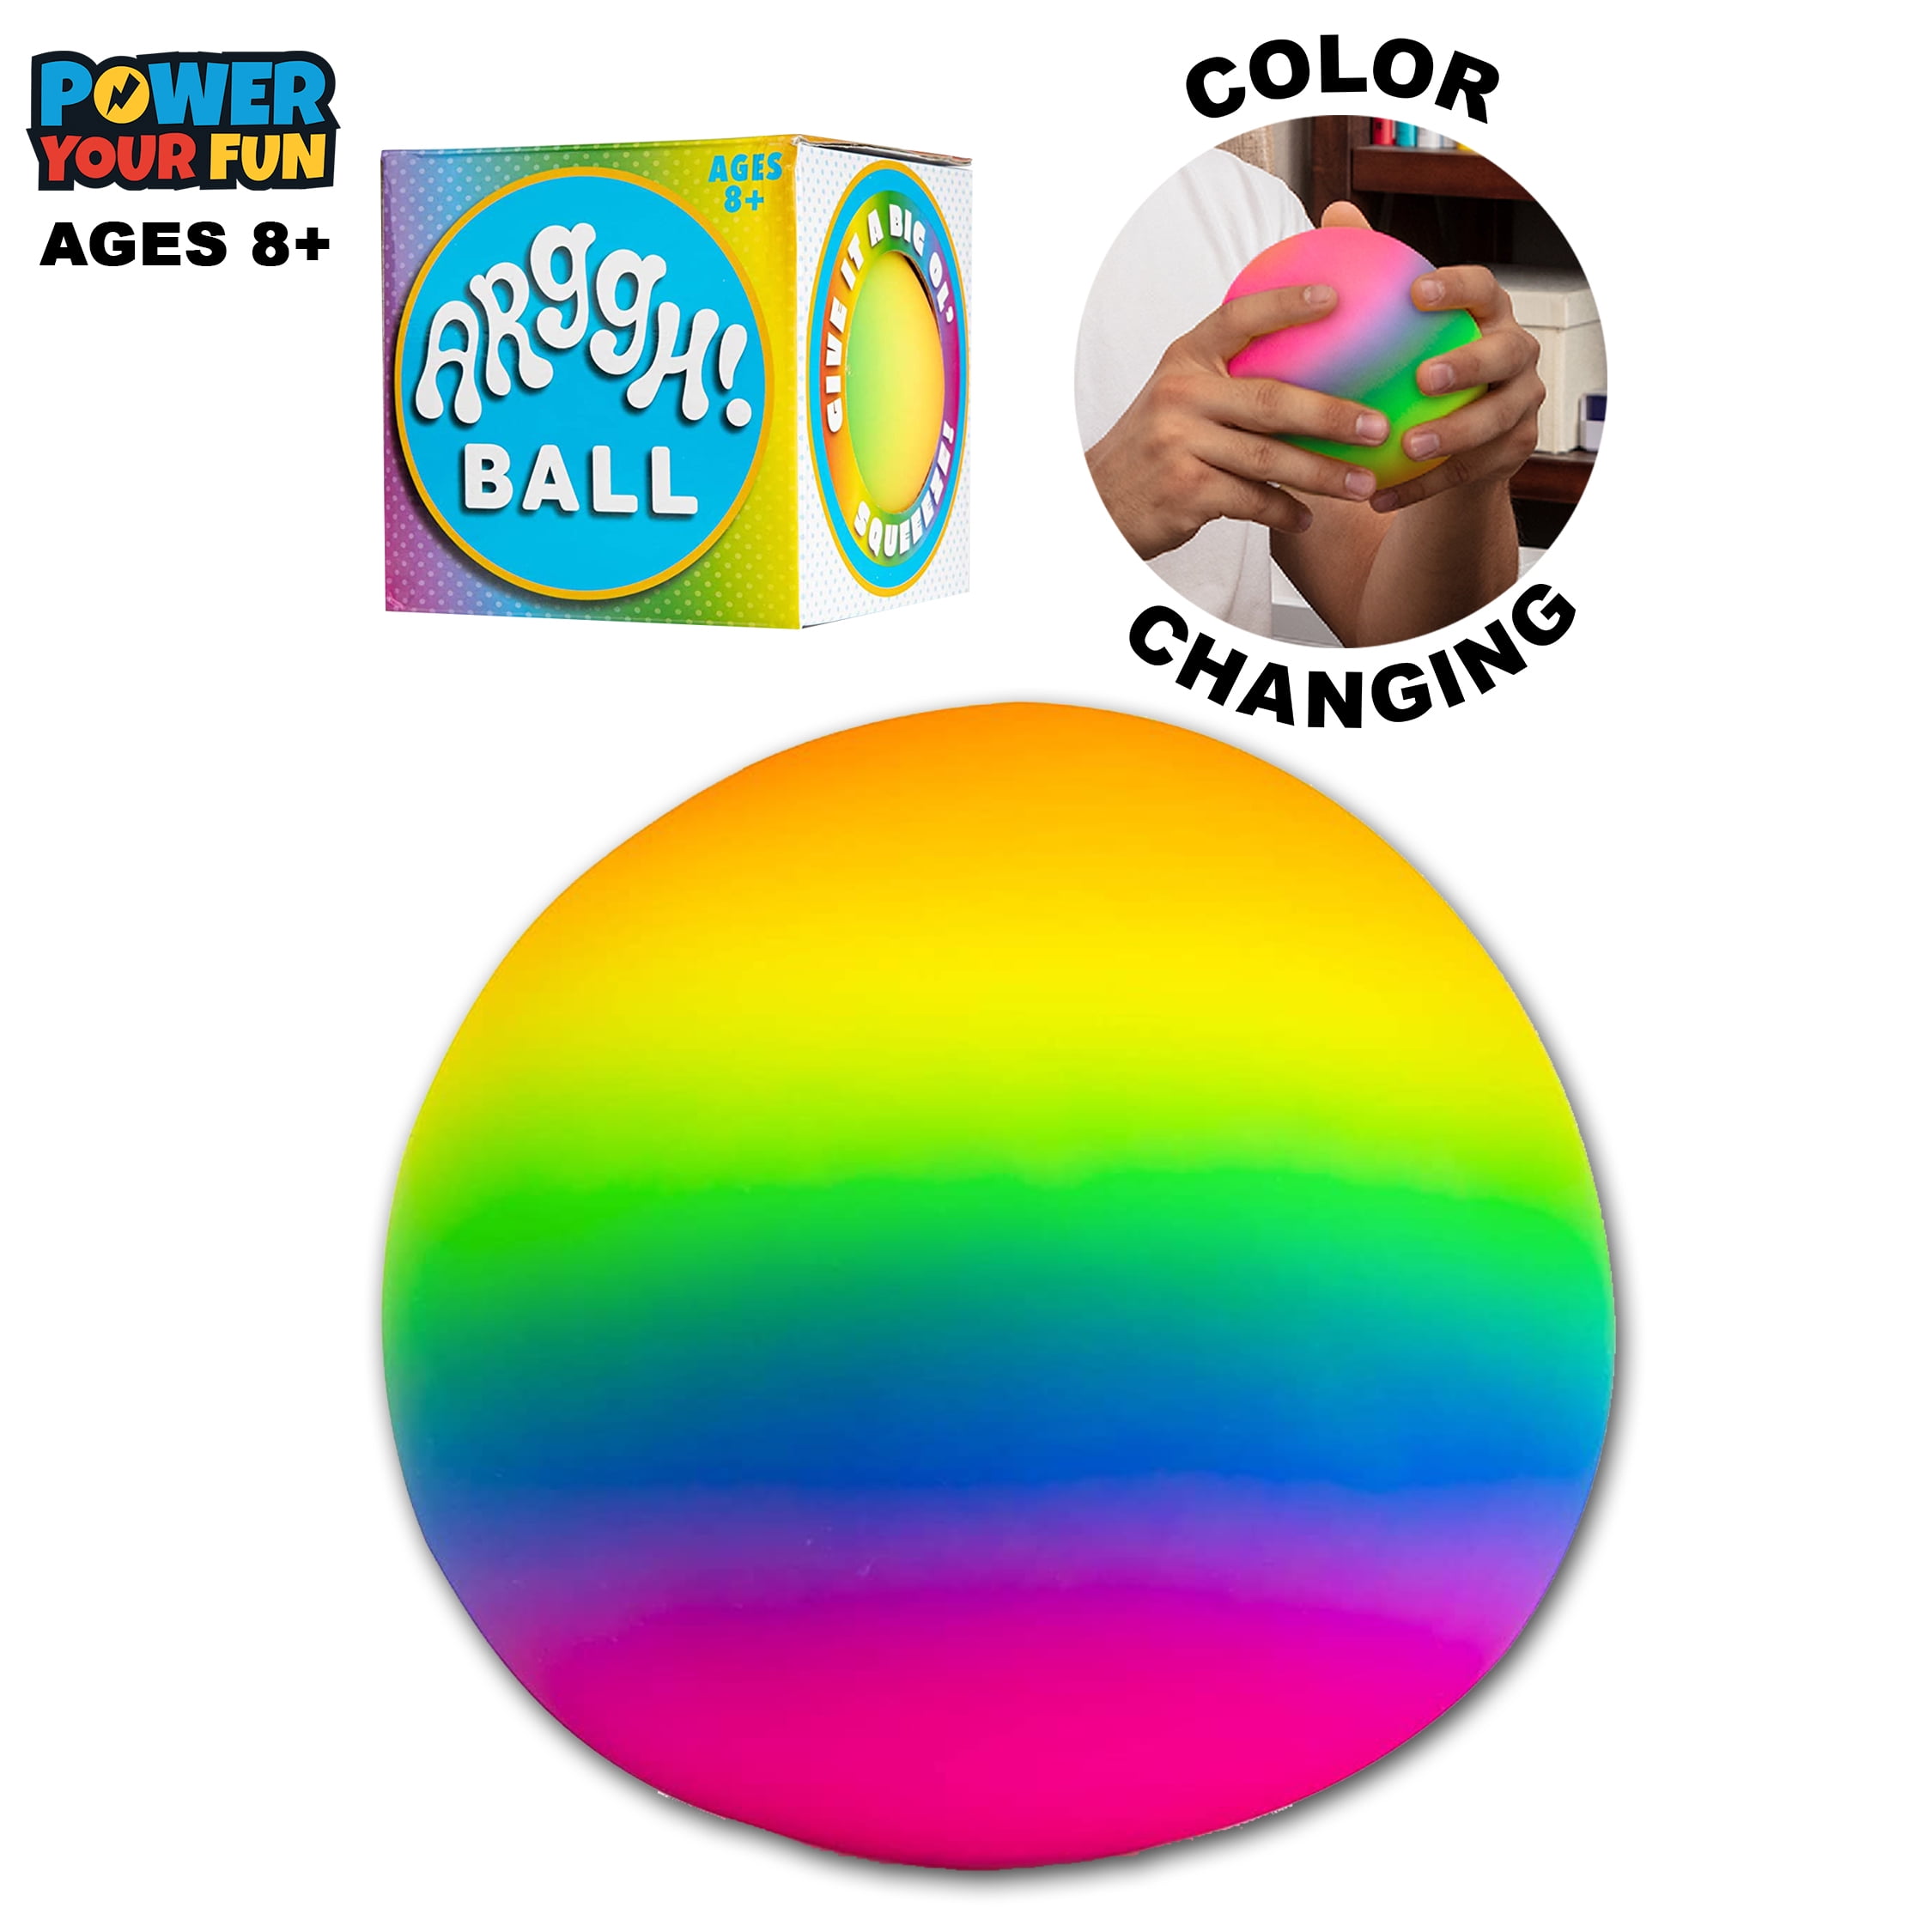 Power Your Fun Fidget Toy Rainbow Stress Ball, Squishy, Stretchy,  Back-to-School Stress Relief Sensory Toy for Kids and Adults